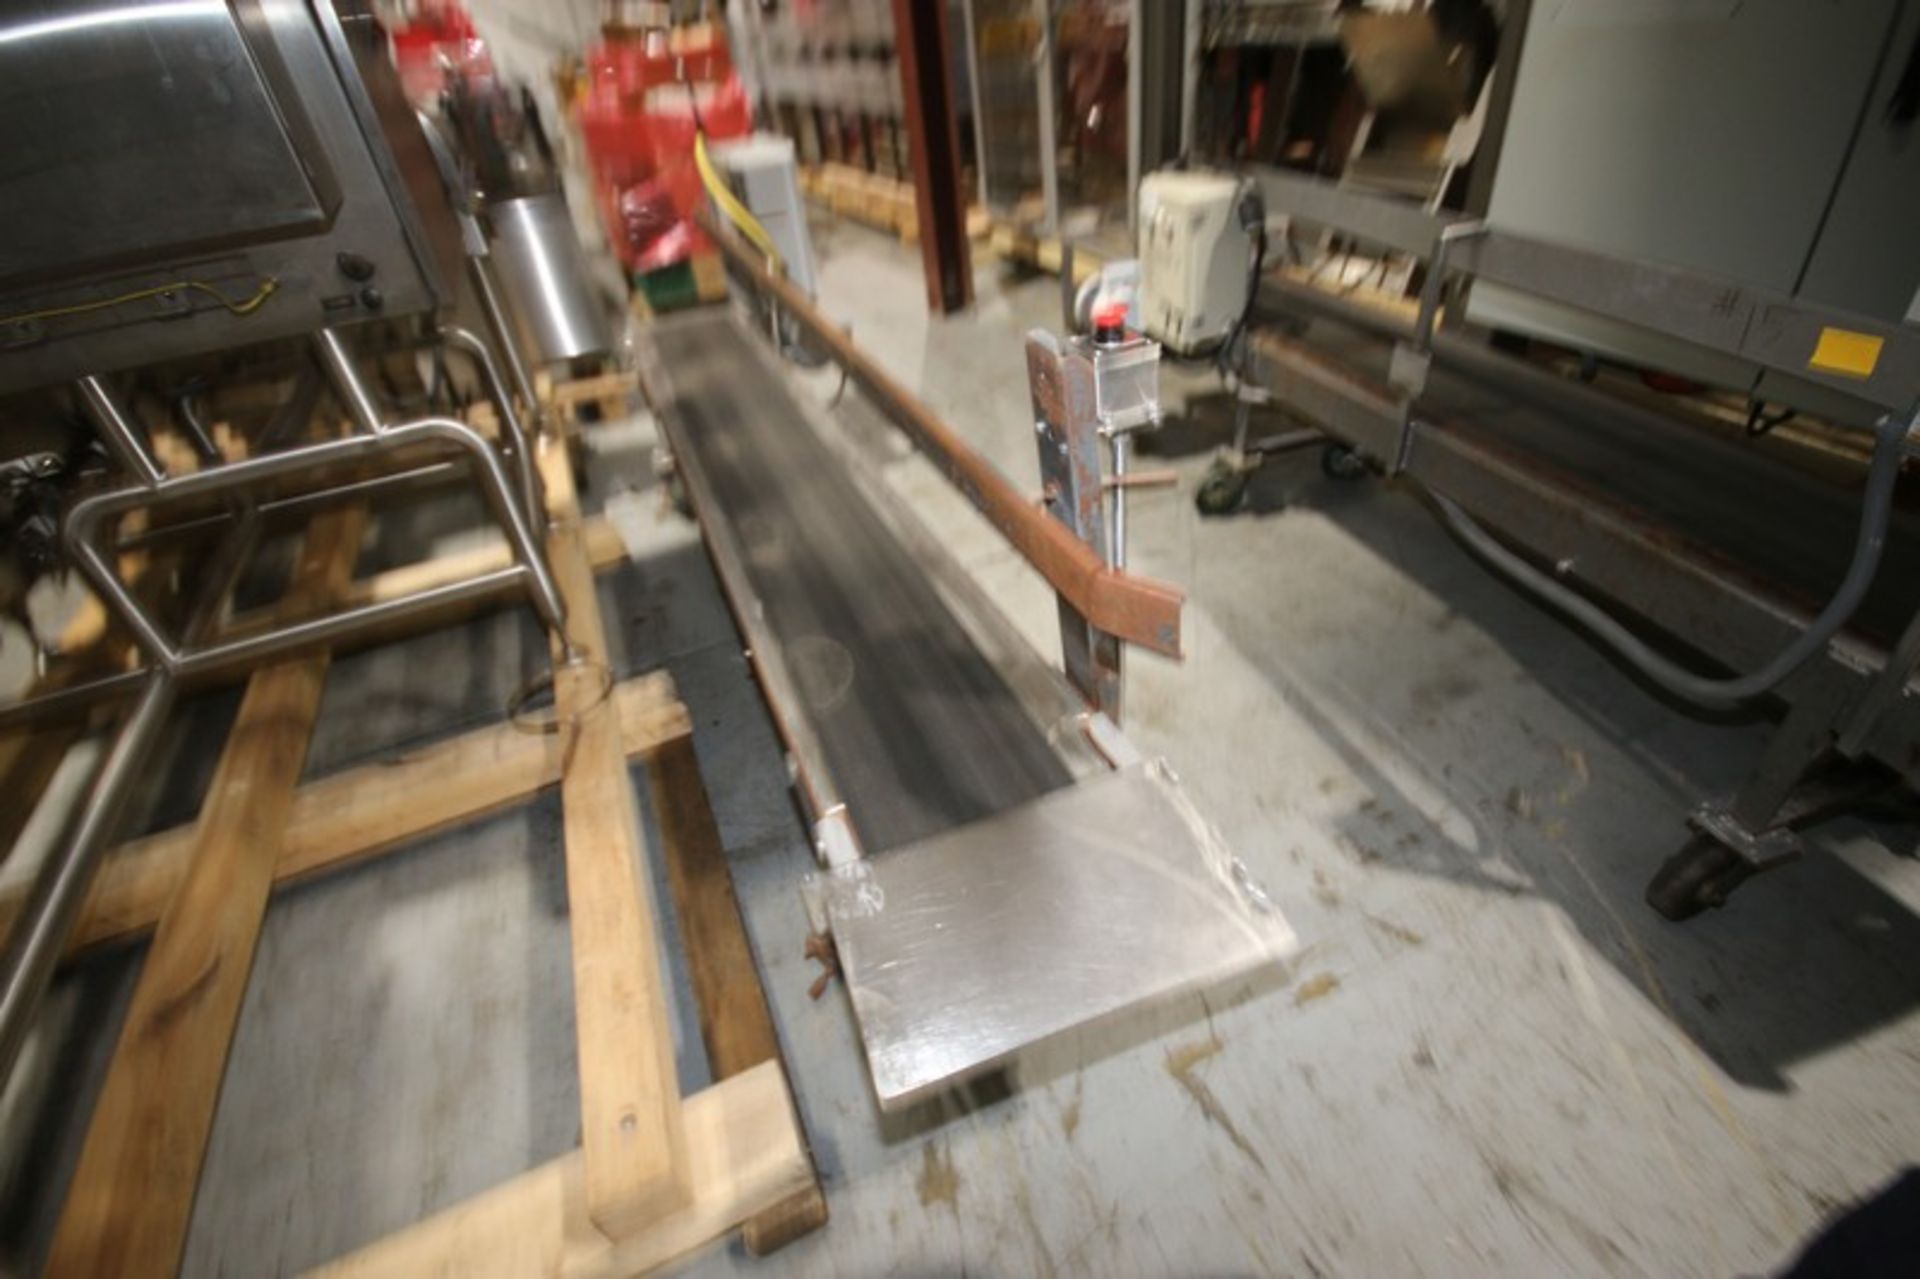 Portable Power Belt Conveyor, Overall Dims.: Aprox. 125" L x 21" H, with 12" W Belt, Baldor 1/2 hp/ - Image 6 of 7